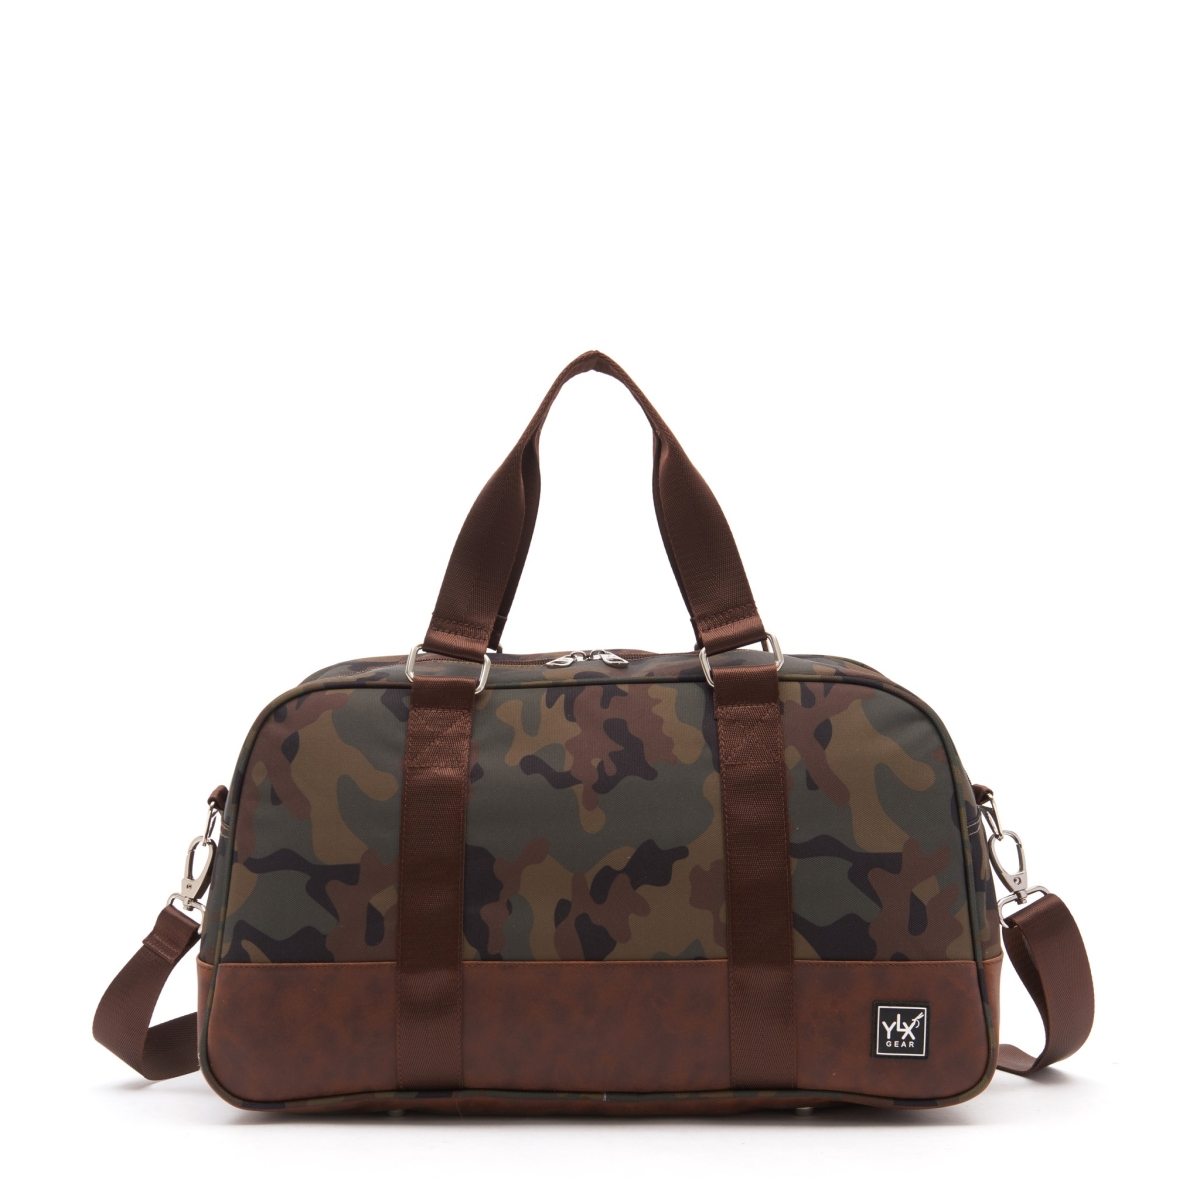 Sac Duffel YLX Classic | Camouflage militaire